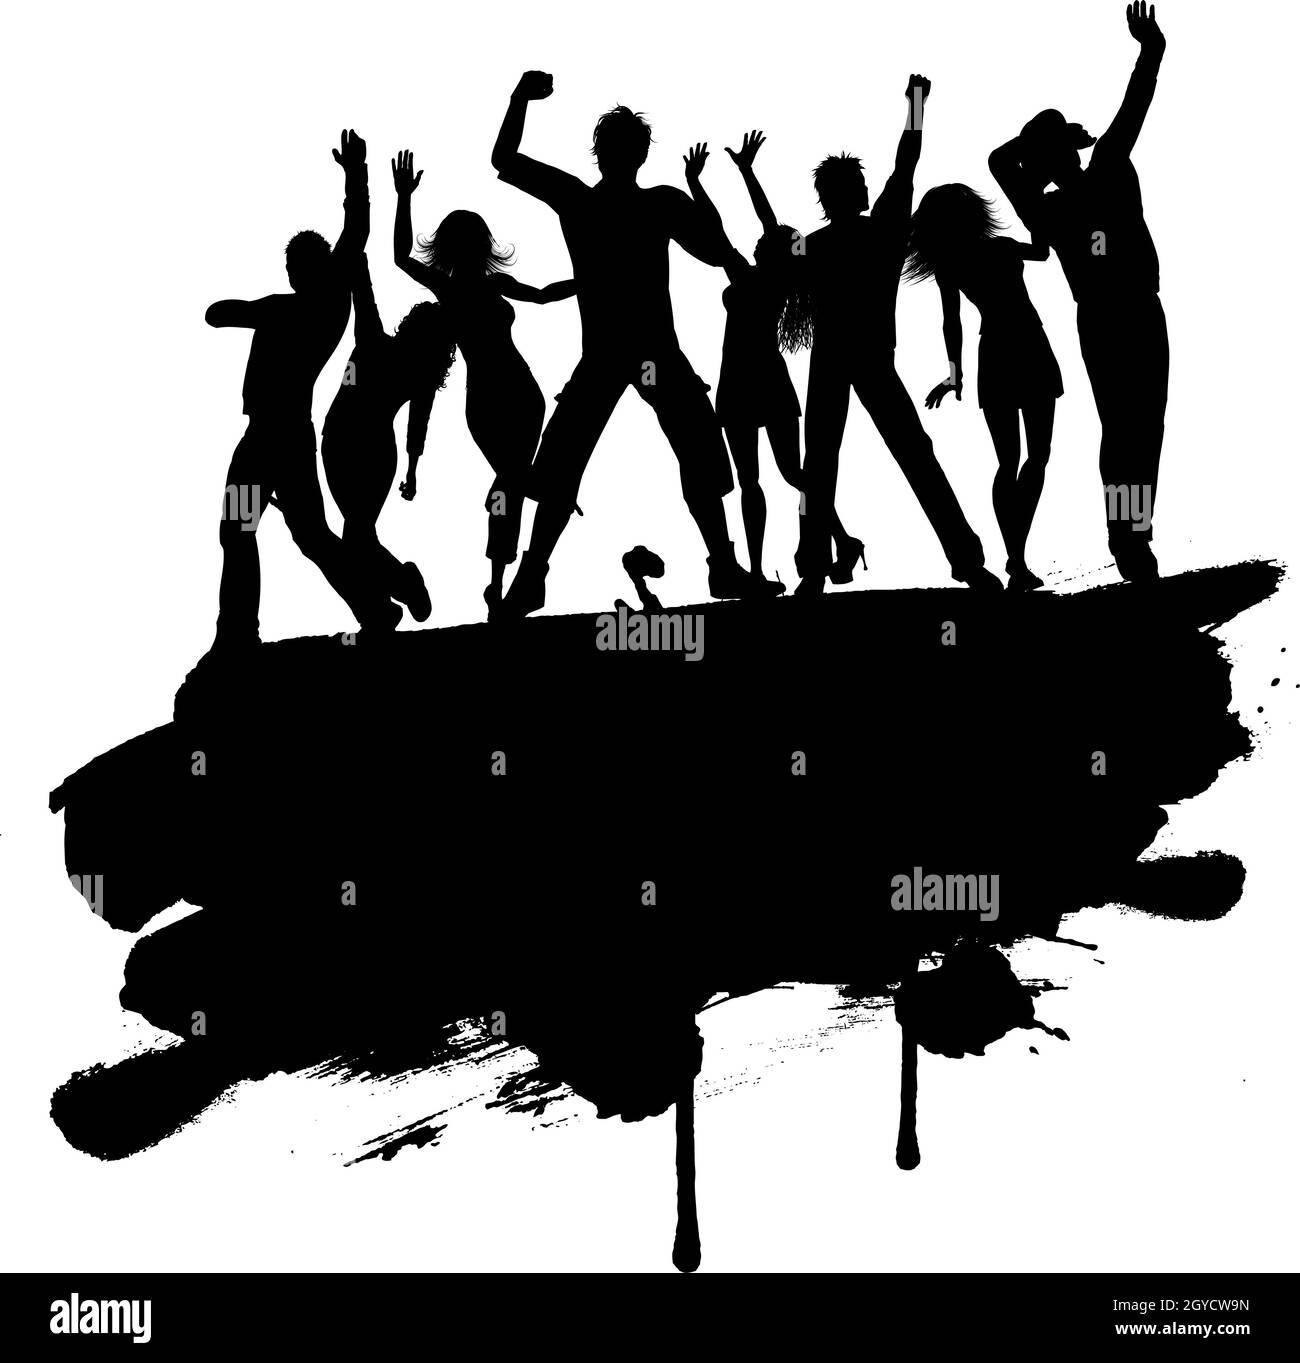 Grunge style silhouette of a group of party people Stock Photo